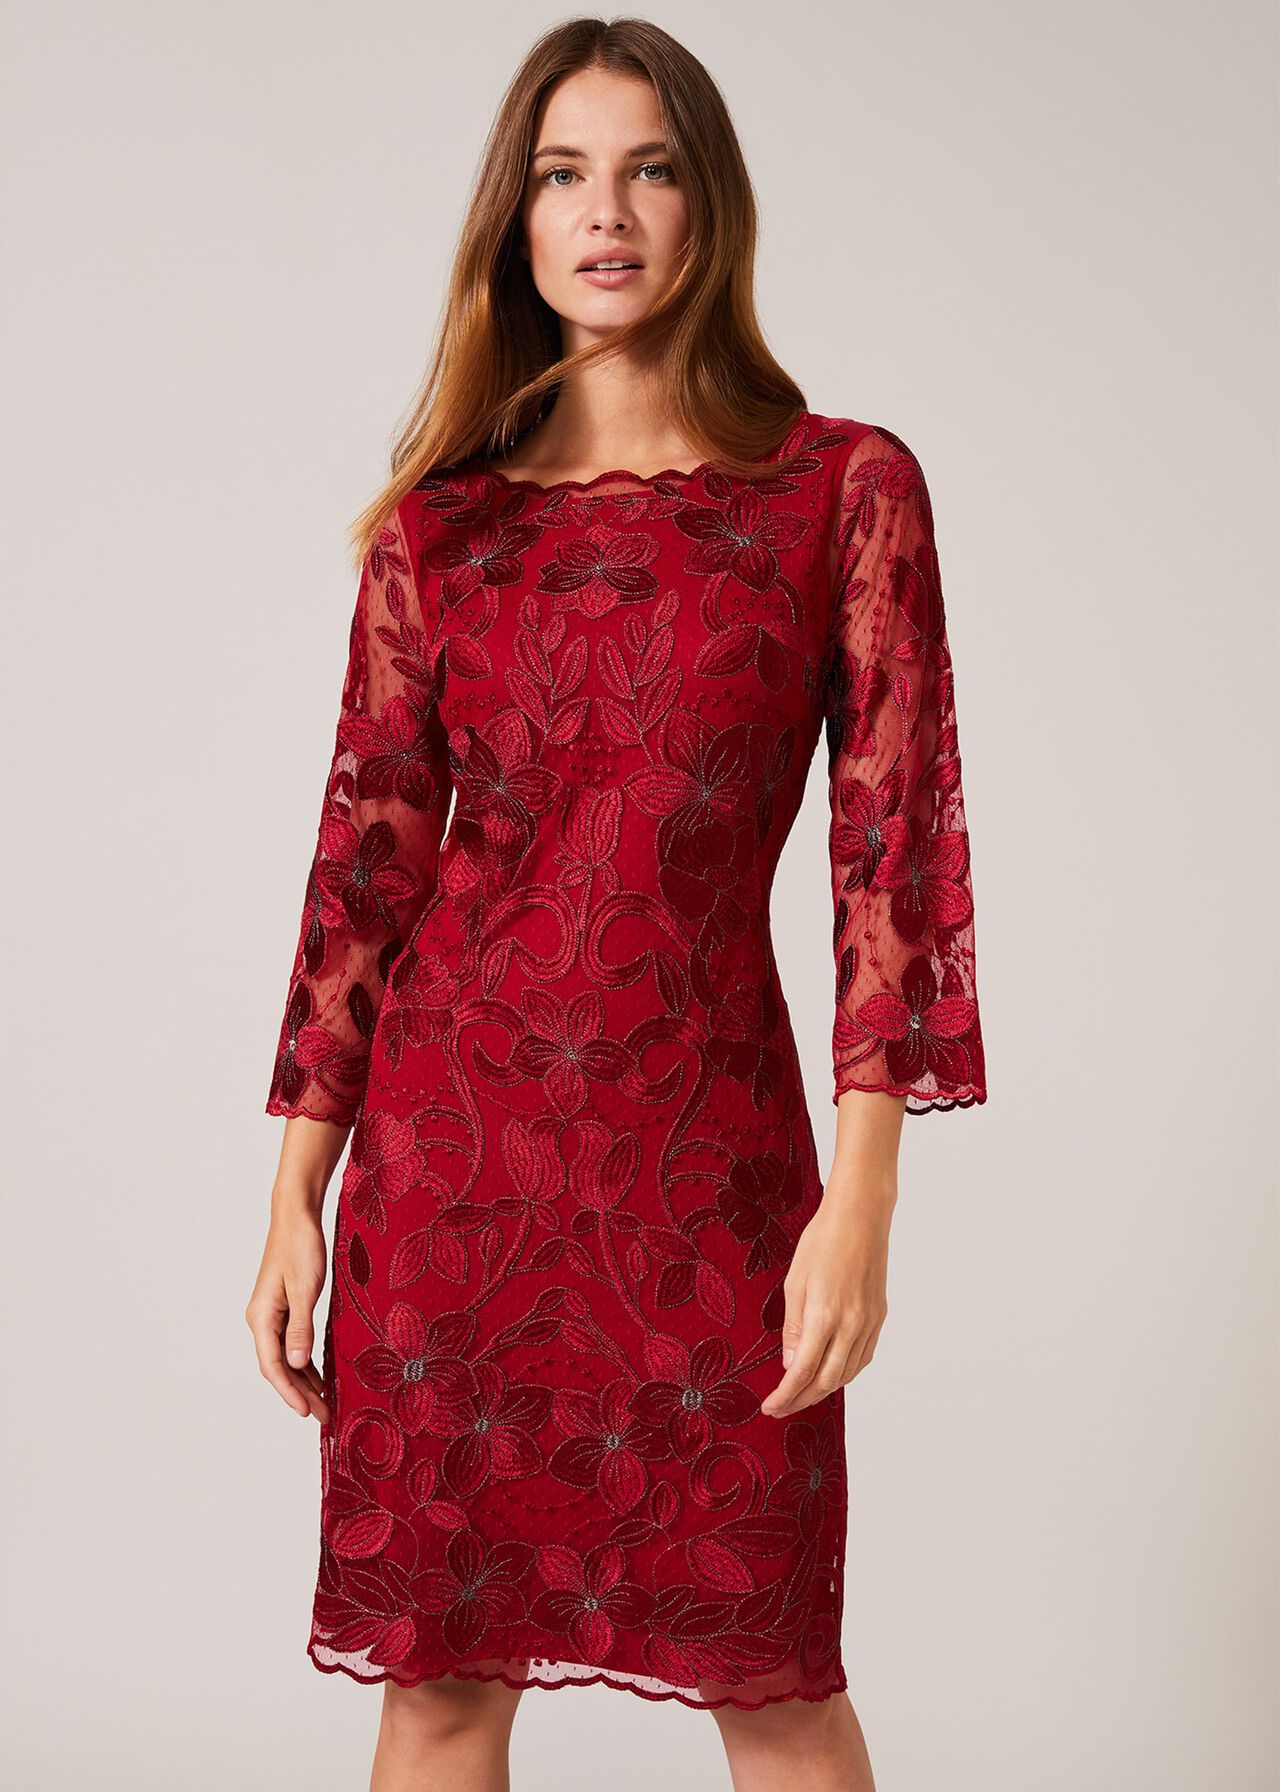 Nessa Embroidered Dress | Phase Eight